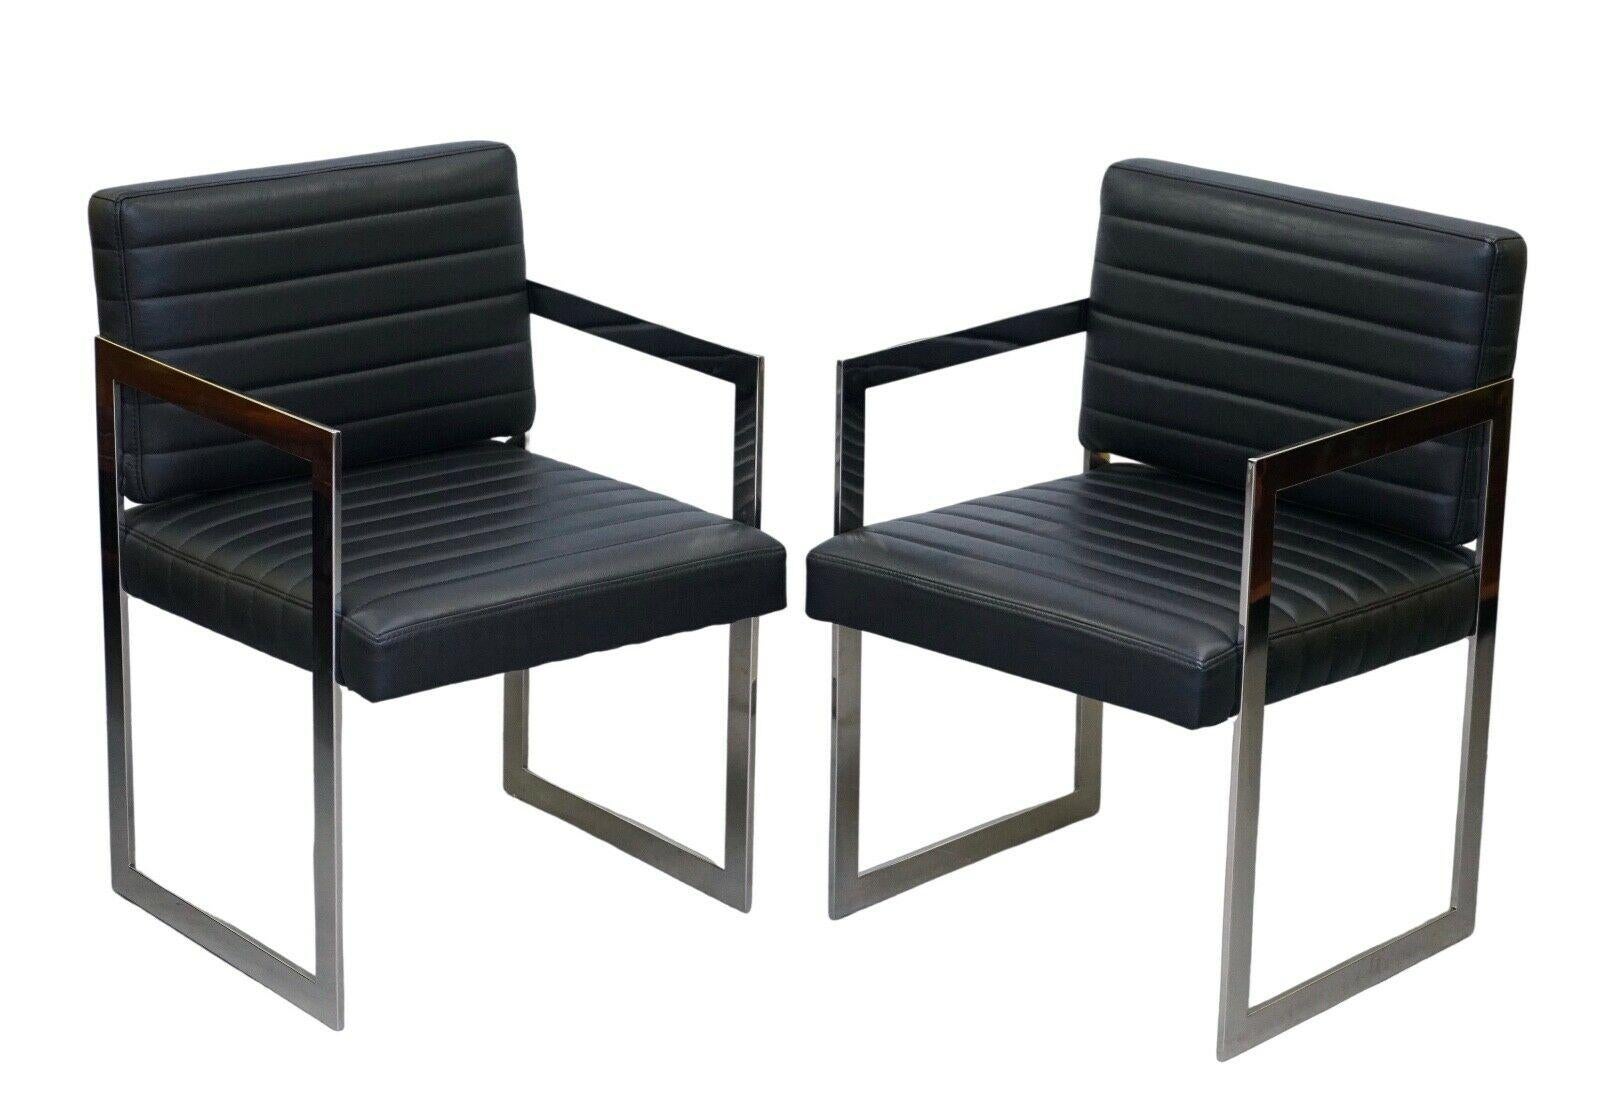 We are delighted to offer for sale these RRP £1,235 Eichholtz black leather & chrome office, desk chairs, offering executive style to your home workspace or study. The chairs feature polished stainless steel legs base and armrests, and black leather